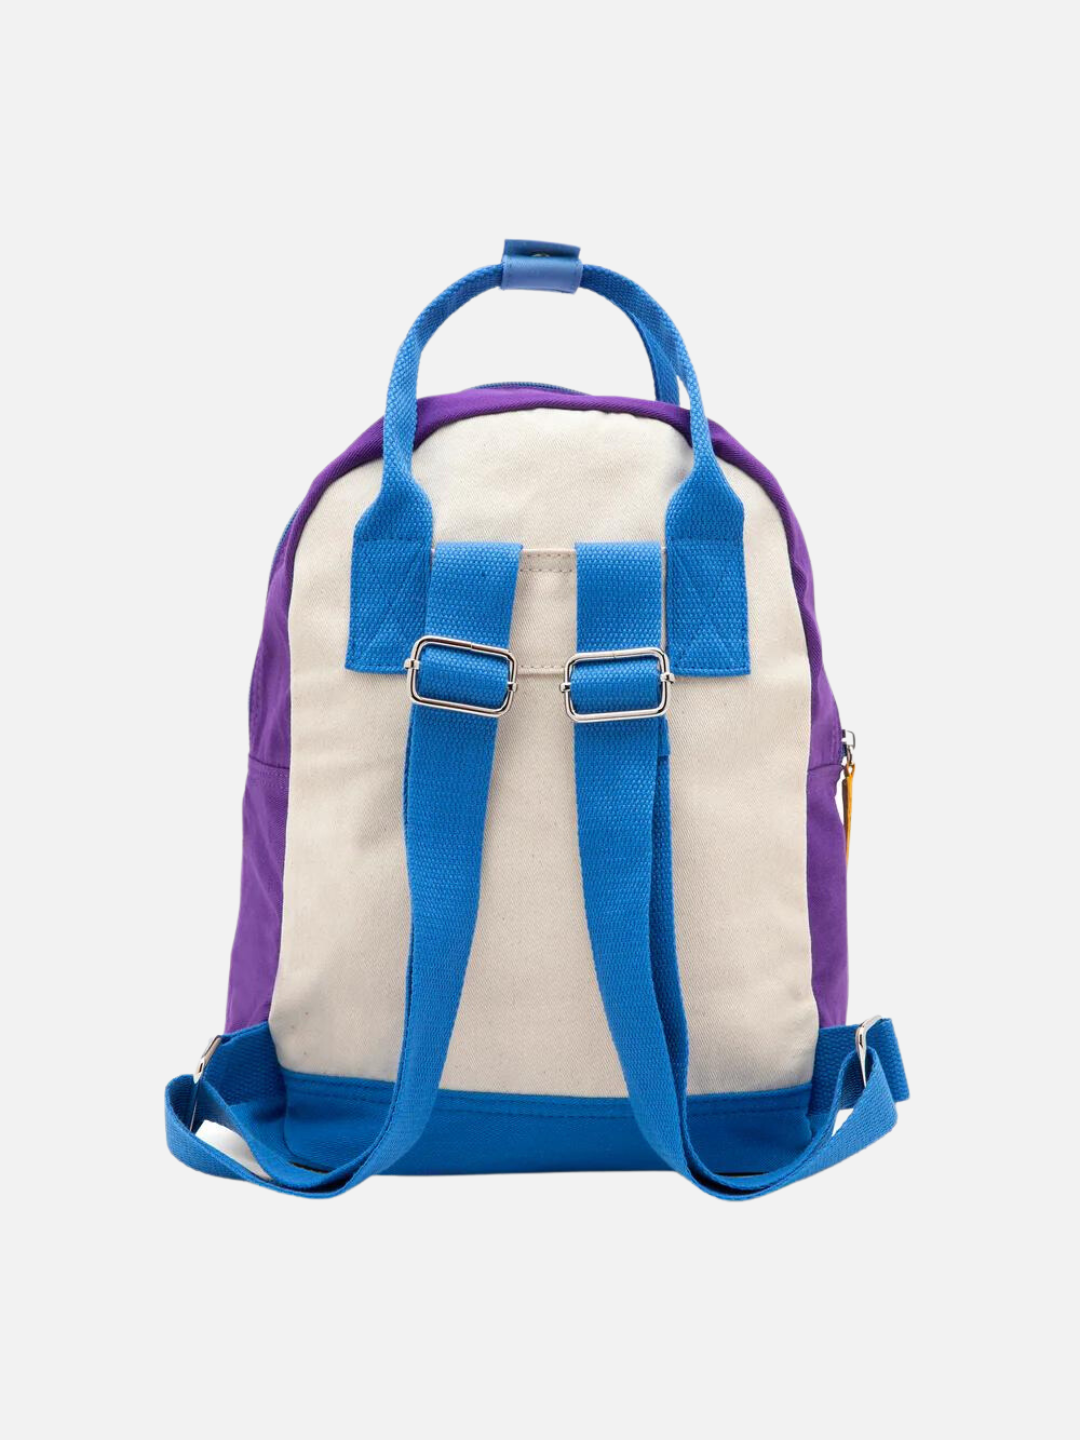 Rear view of a colorblock backback with bright blue handles, straps and base, purple sides and a cream backing